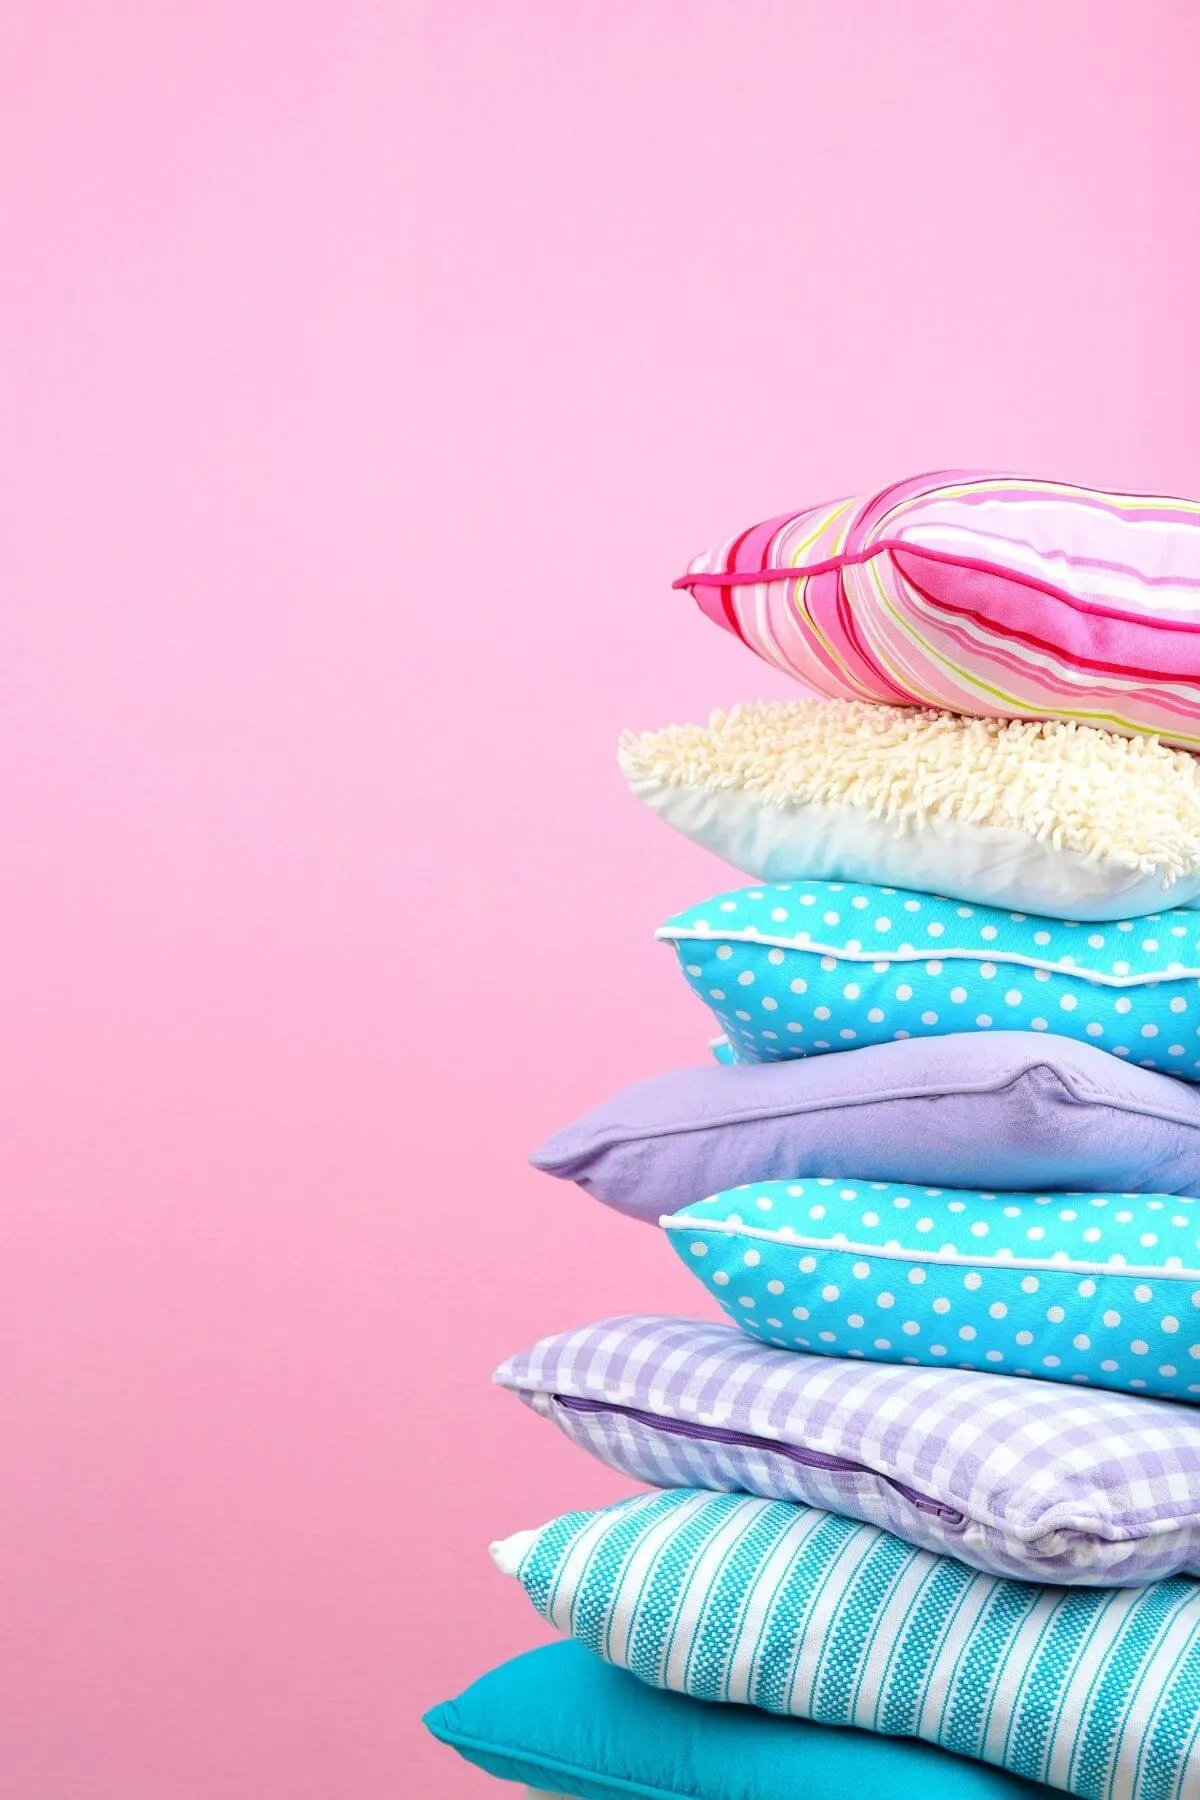 How to wash throw pillows